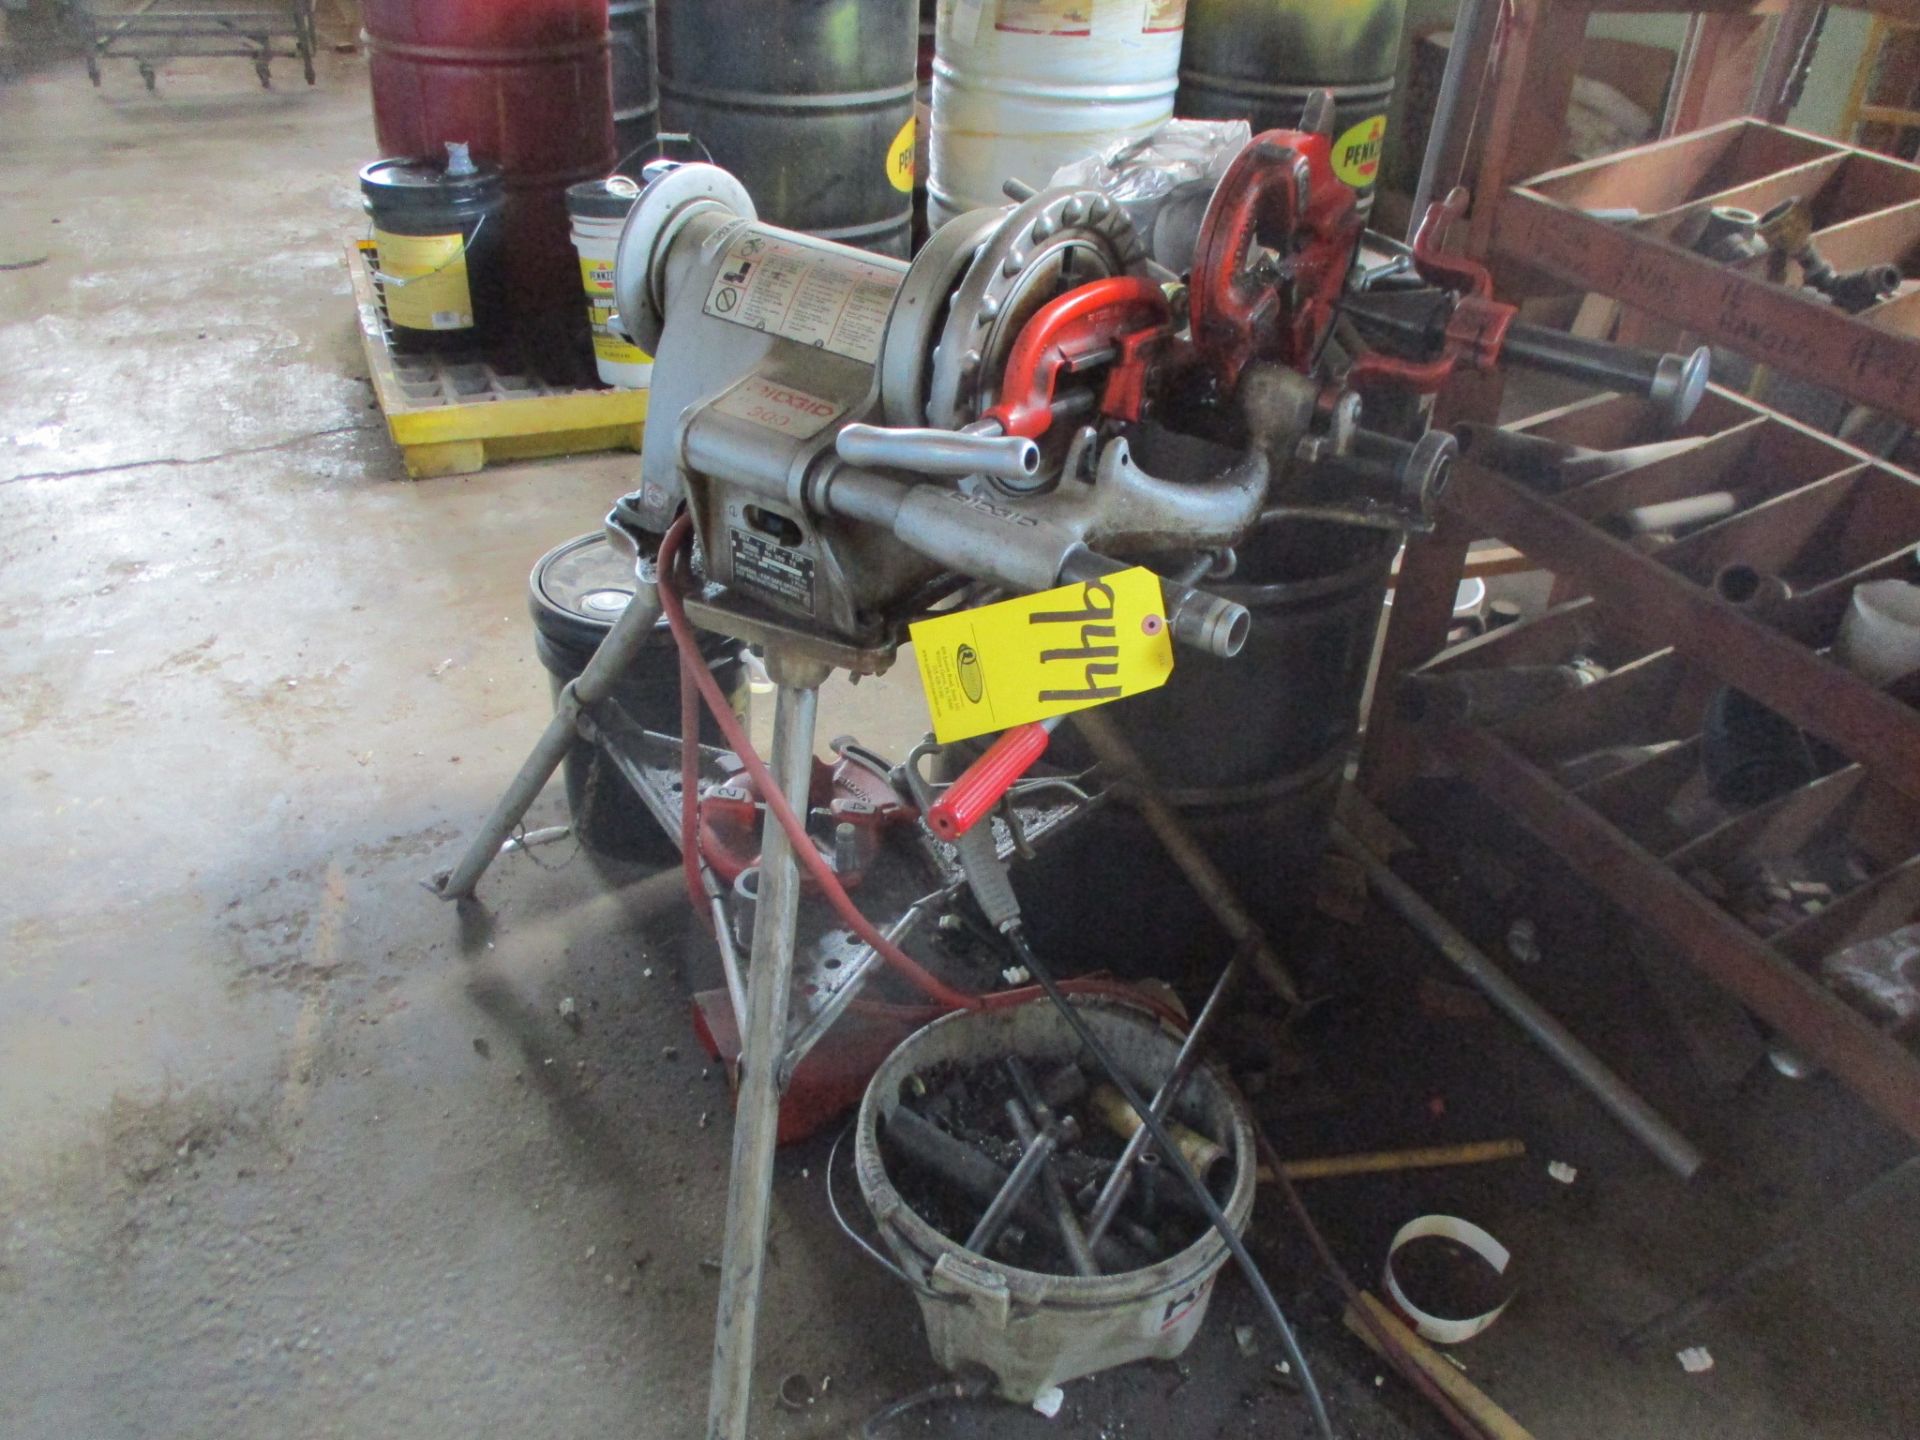 Ridgid 300 Electric Pipe Threader on Tri-Stand, Oil Bucket, Dies and Pipe Fitting